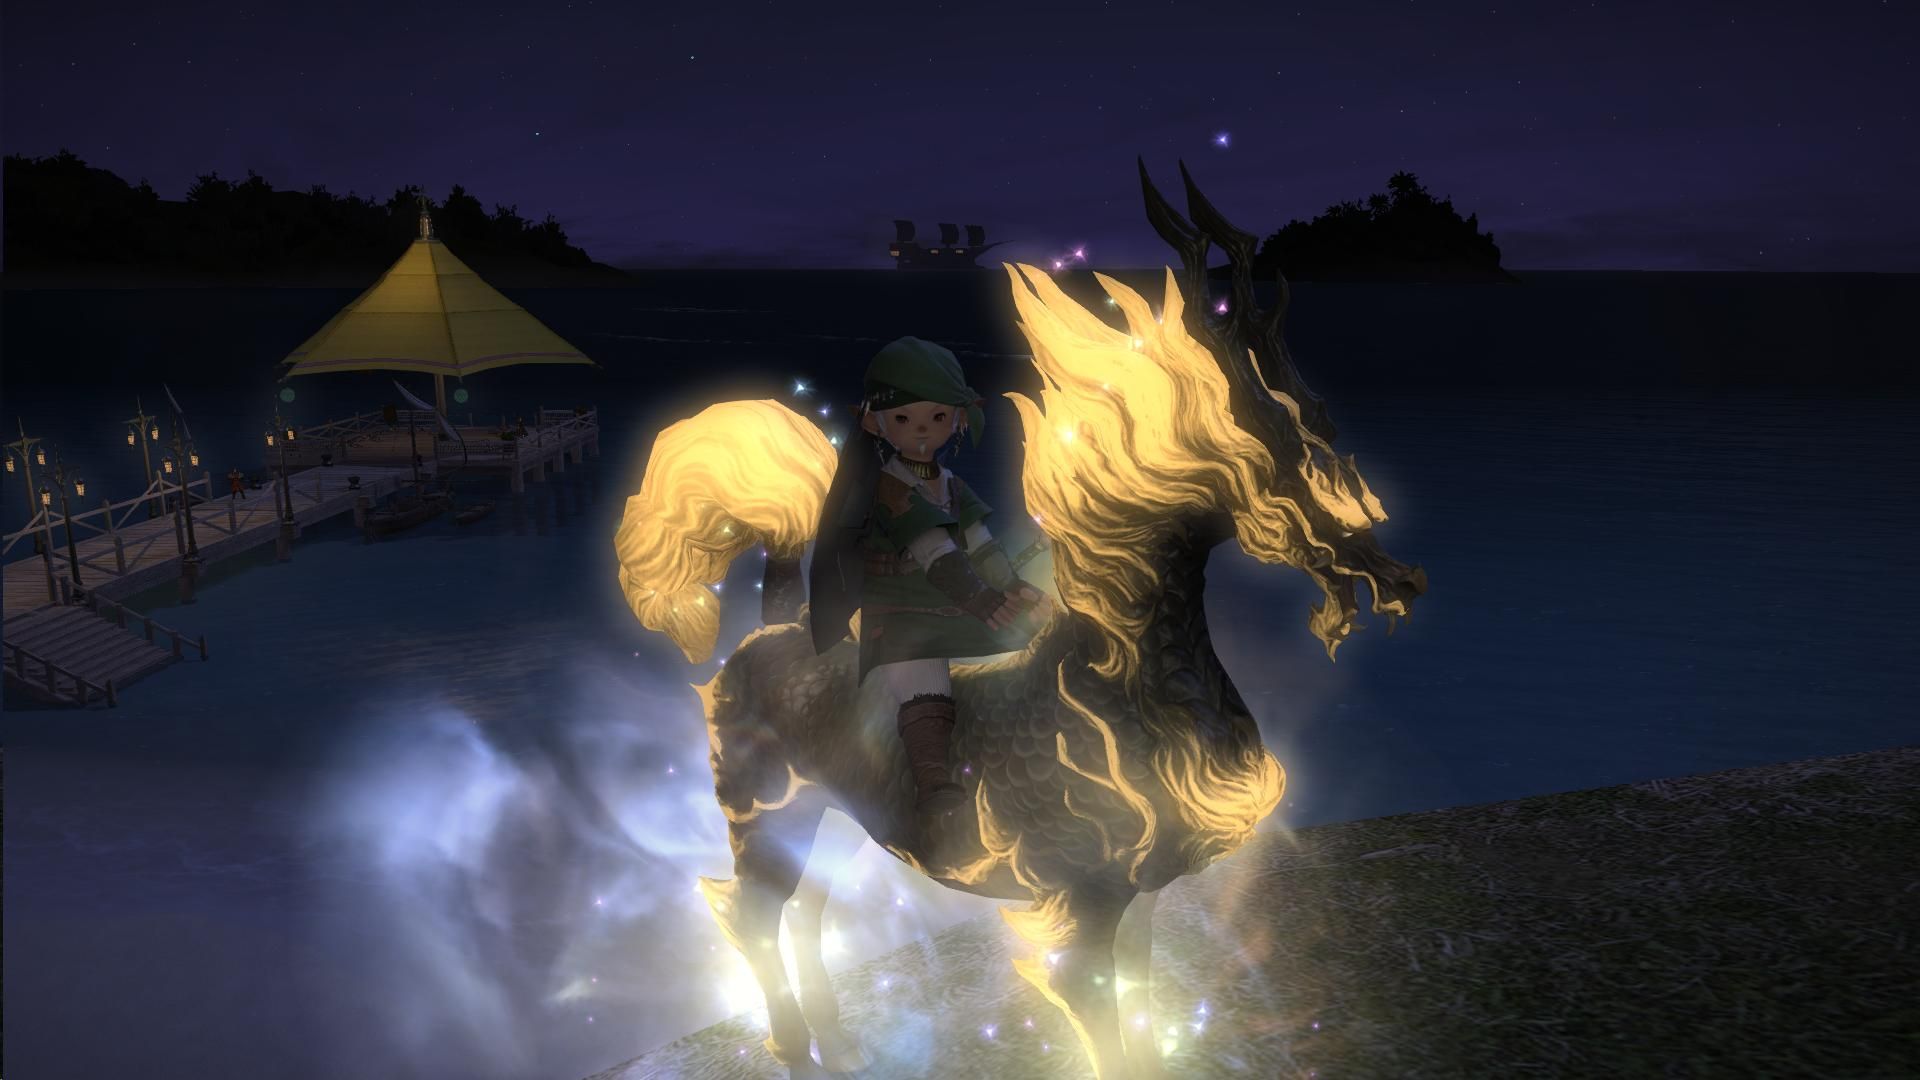 The mythical Kirin mount in Final Fantasy 14